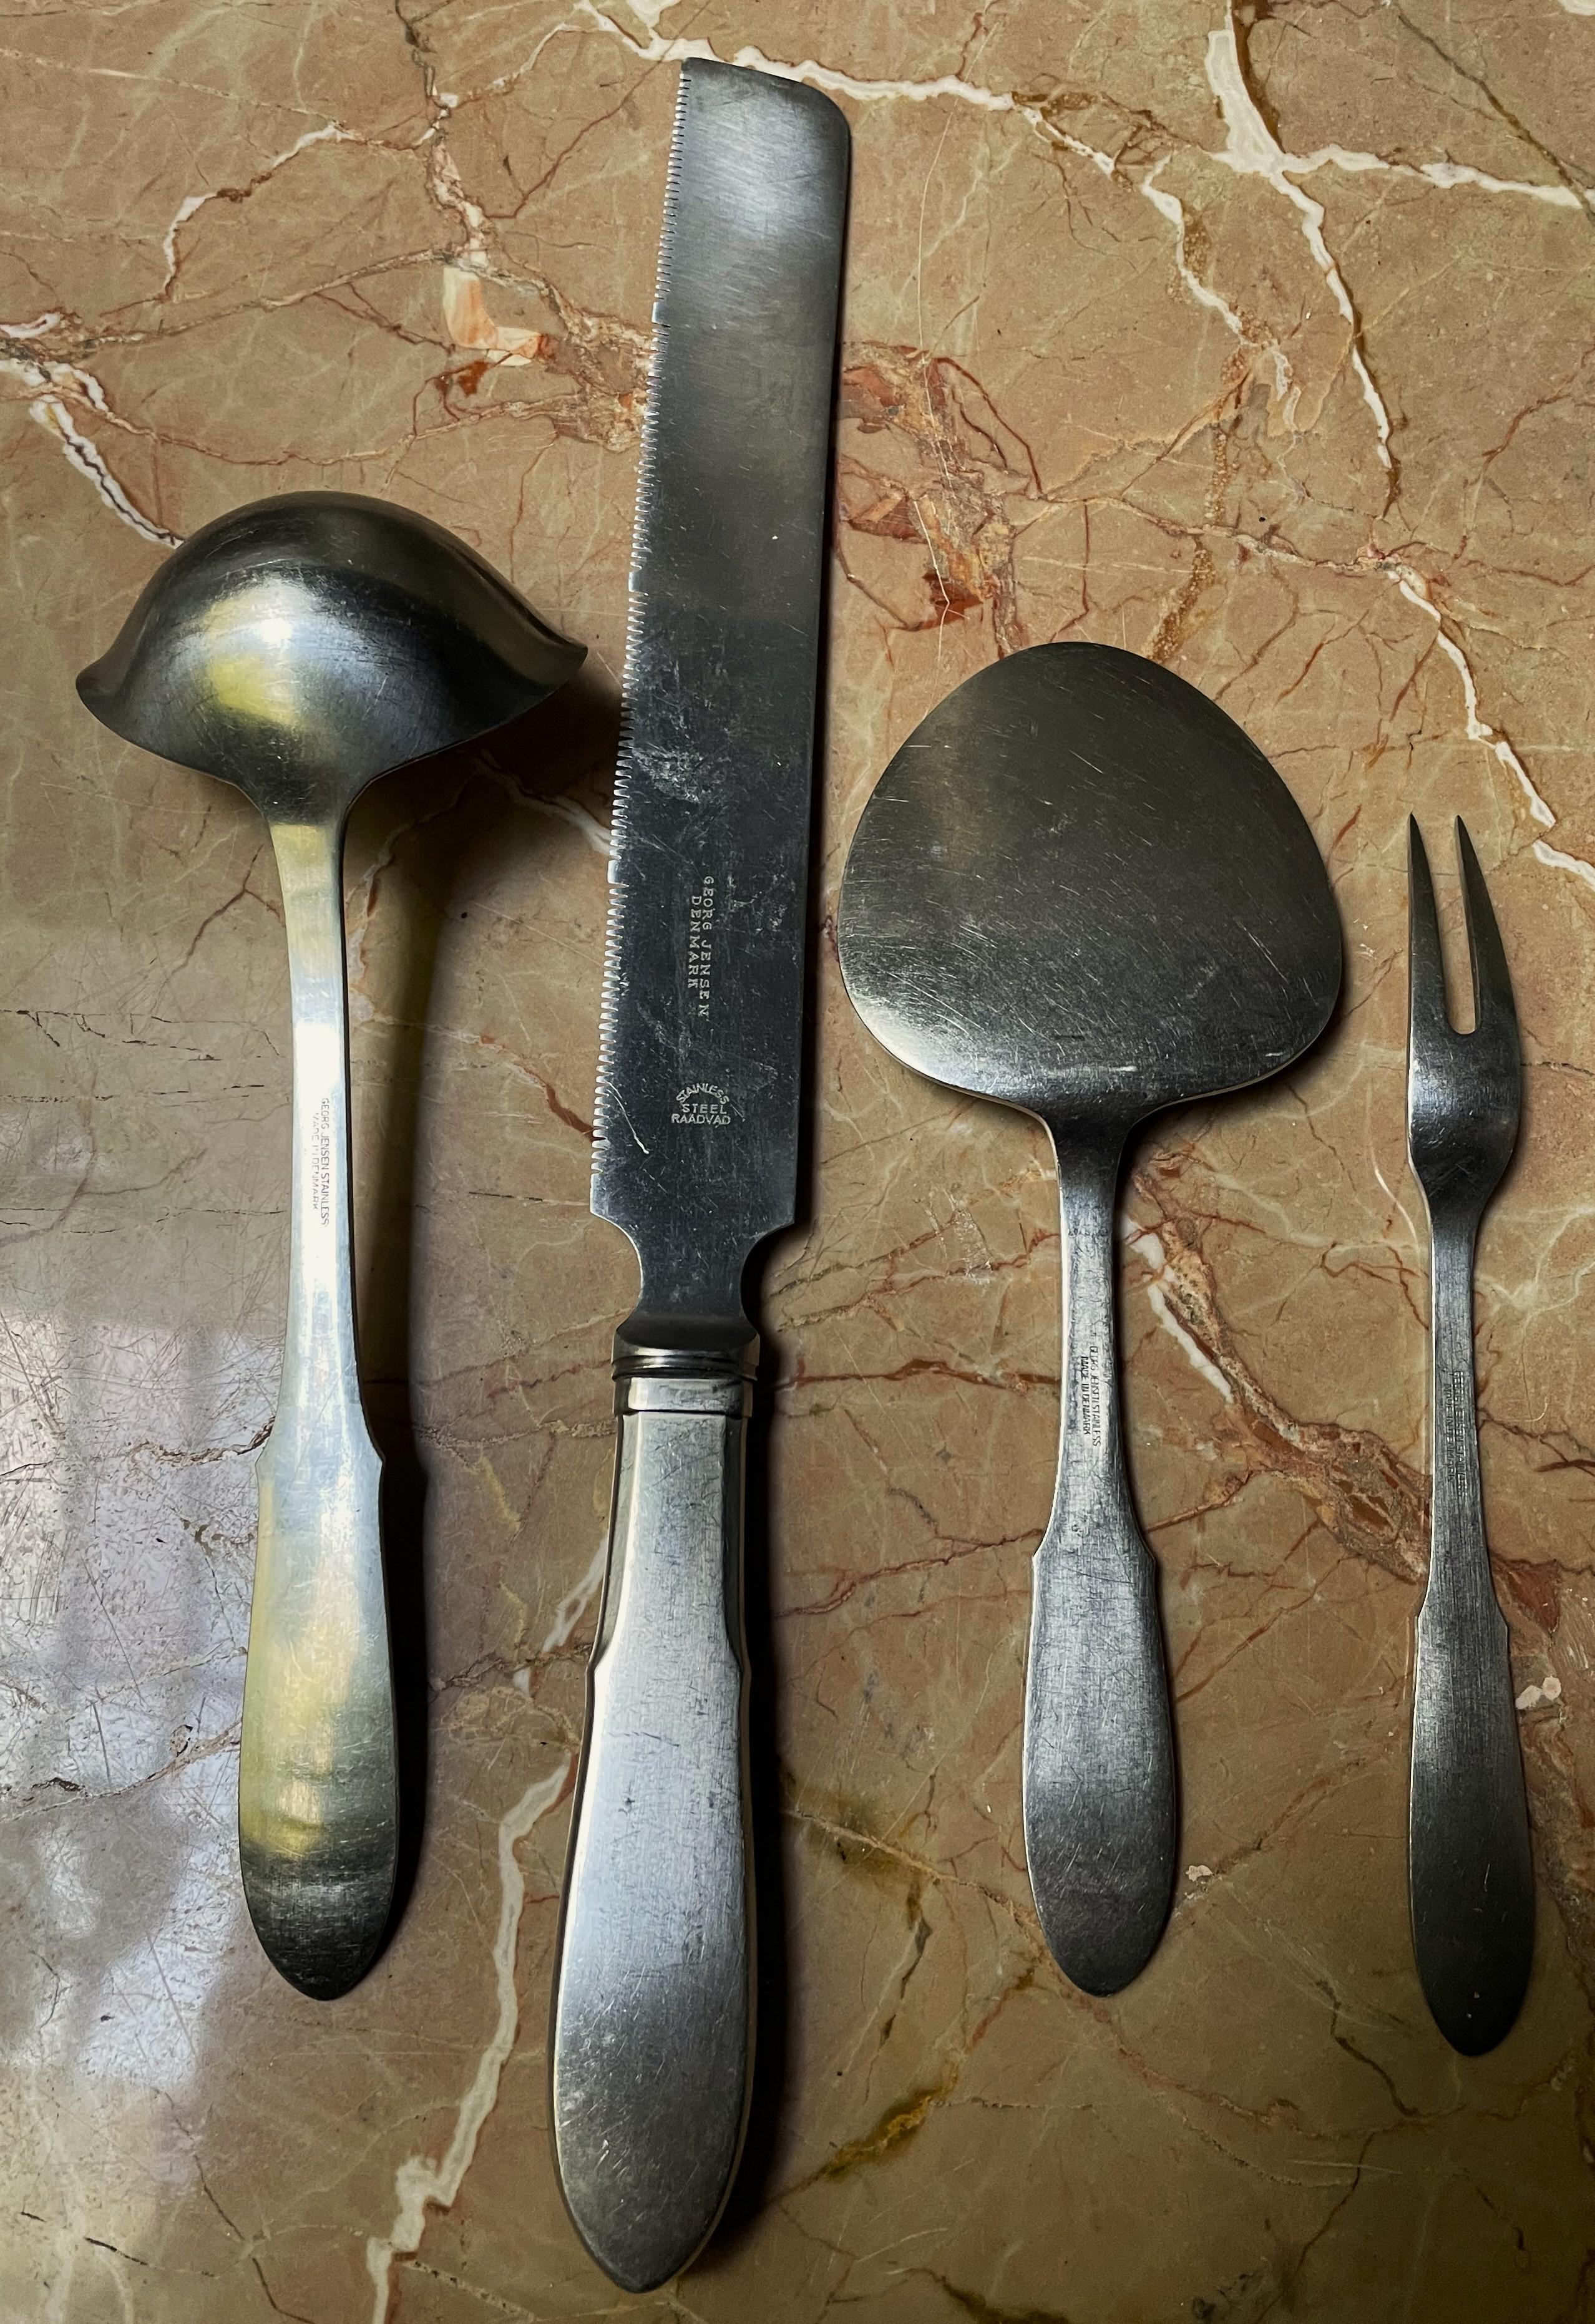 This is a great Georg Jensen stainless steel set of four matching serving pieces in the simple but tasteful, as are all Georg Jensen patterns, Mitra pattern. They have been used and show scratches and signs of wear as shown in the photos but they